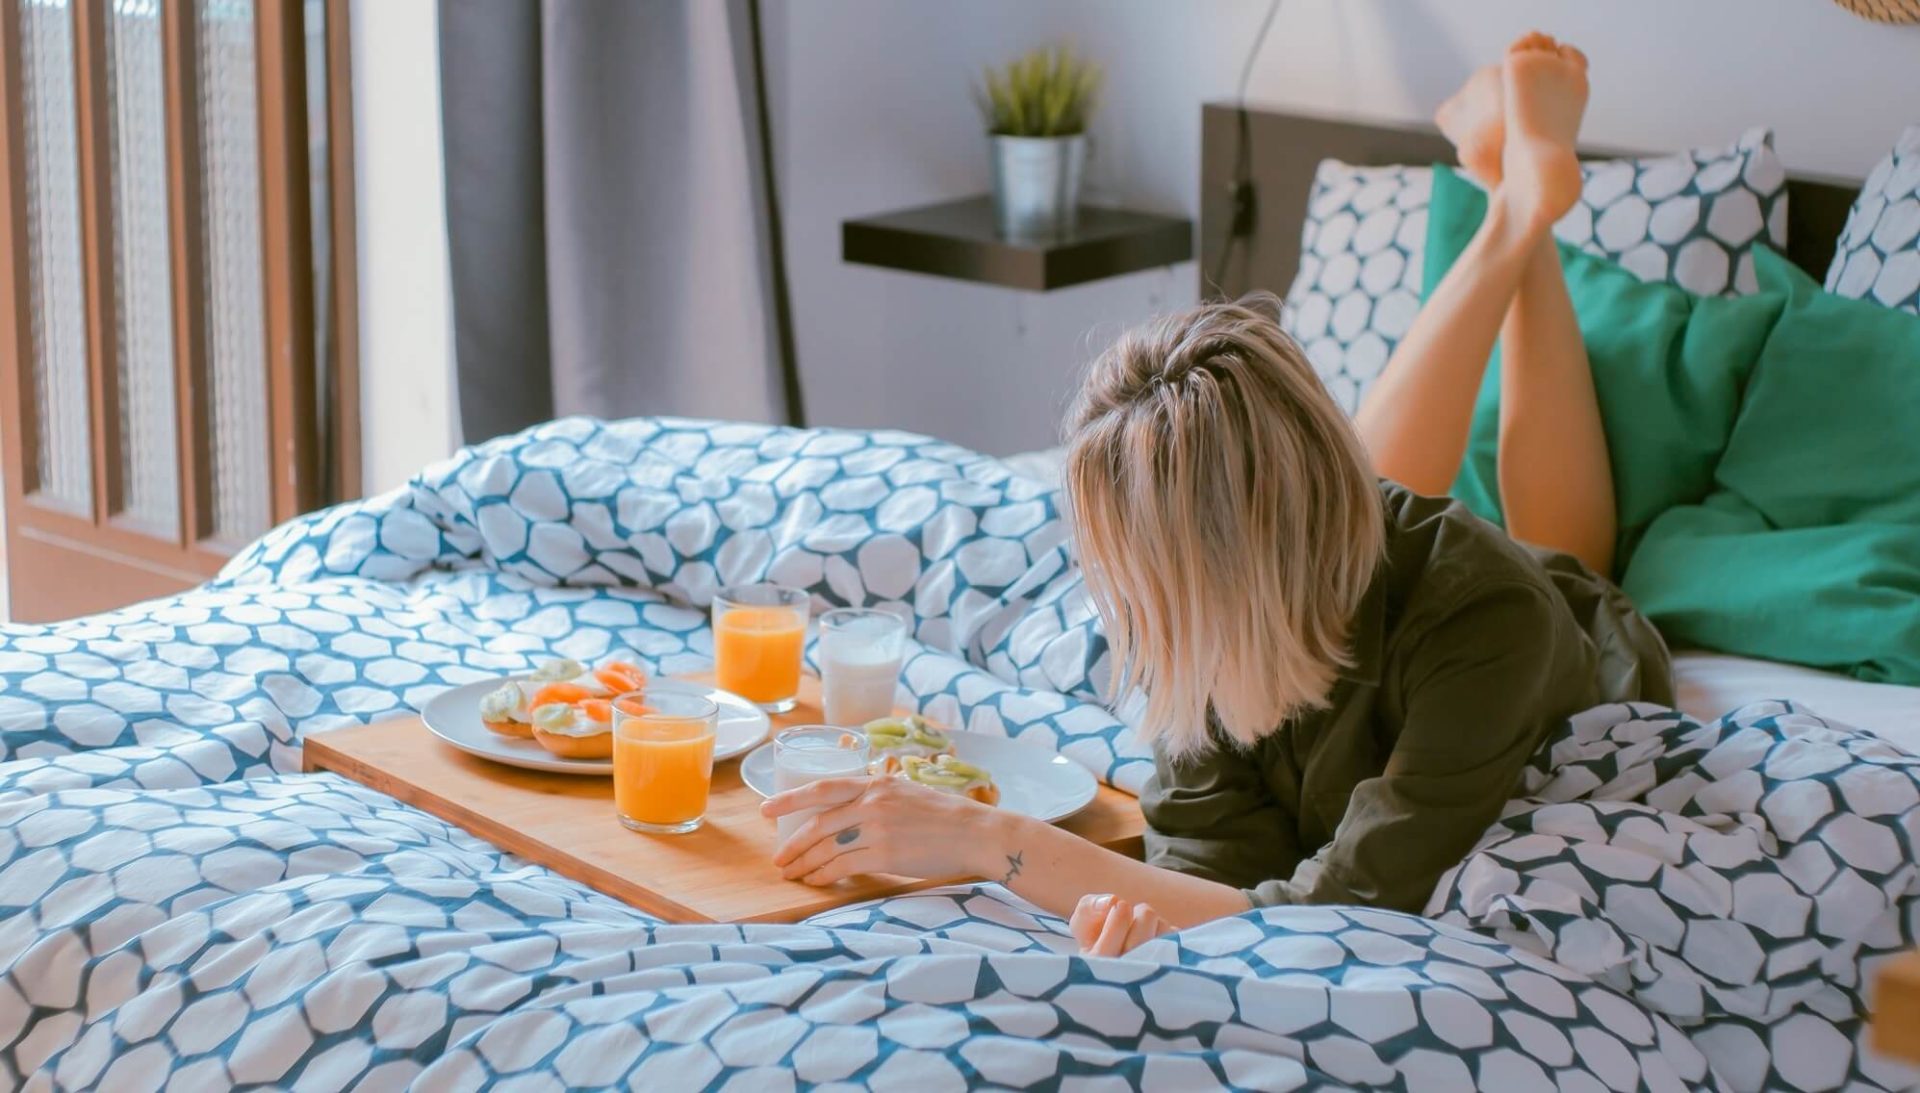 woman lays on bed with hand on tray of breakfast items